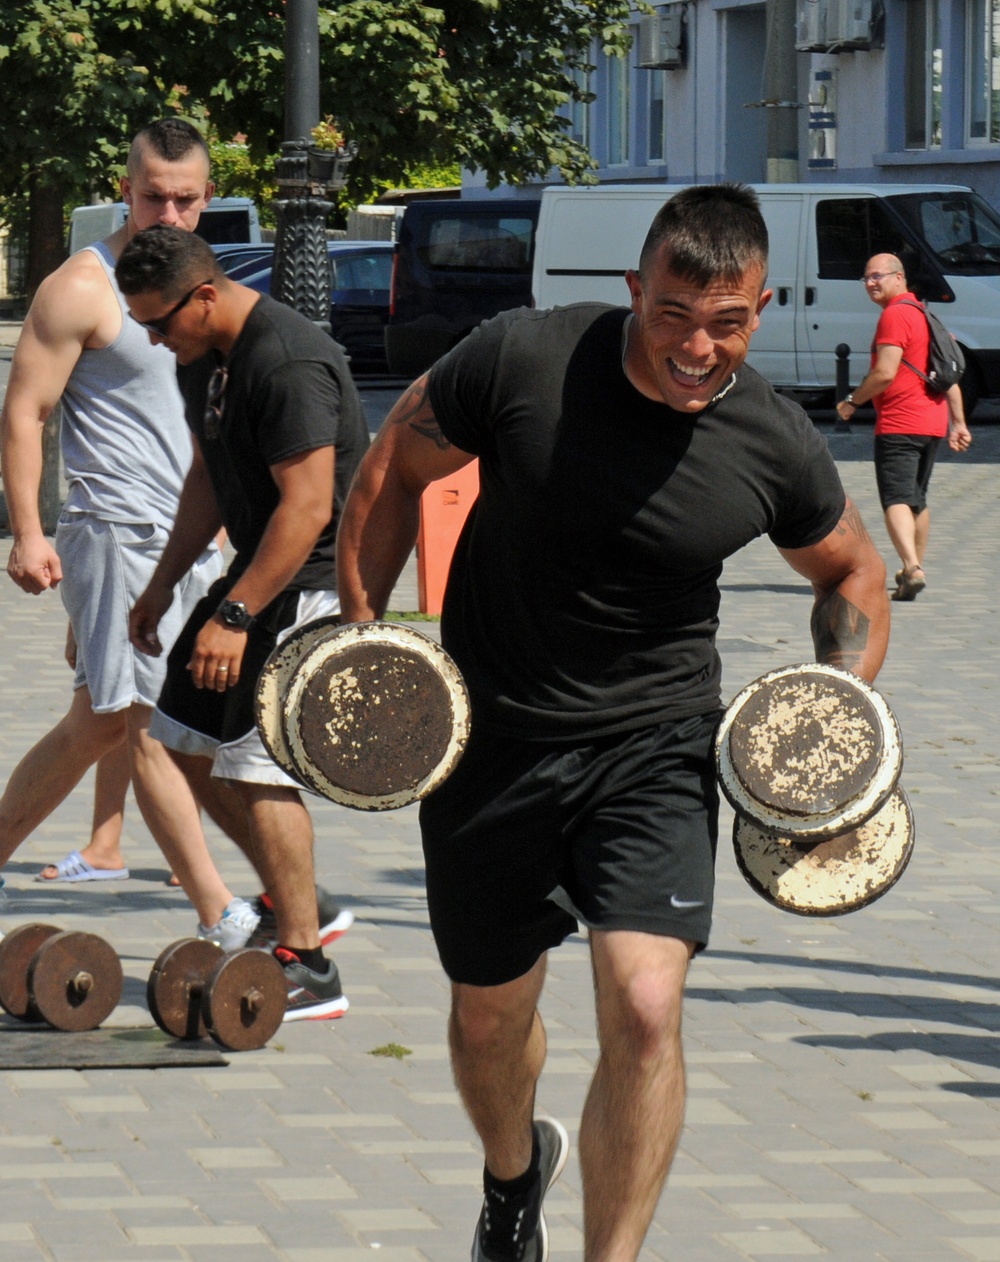 American servicemembers participate in friendly strongman competition